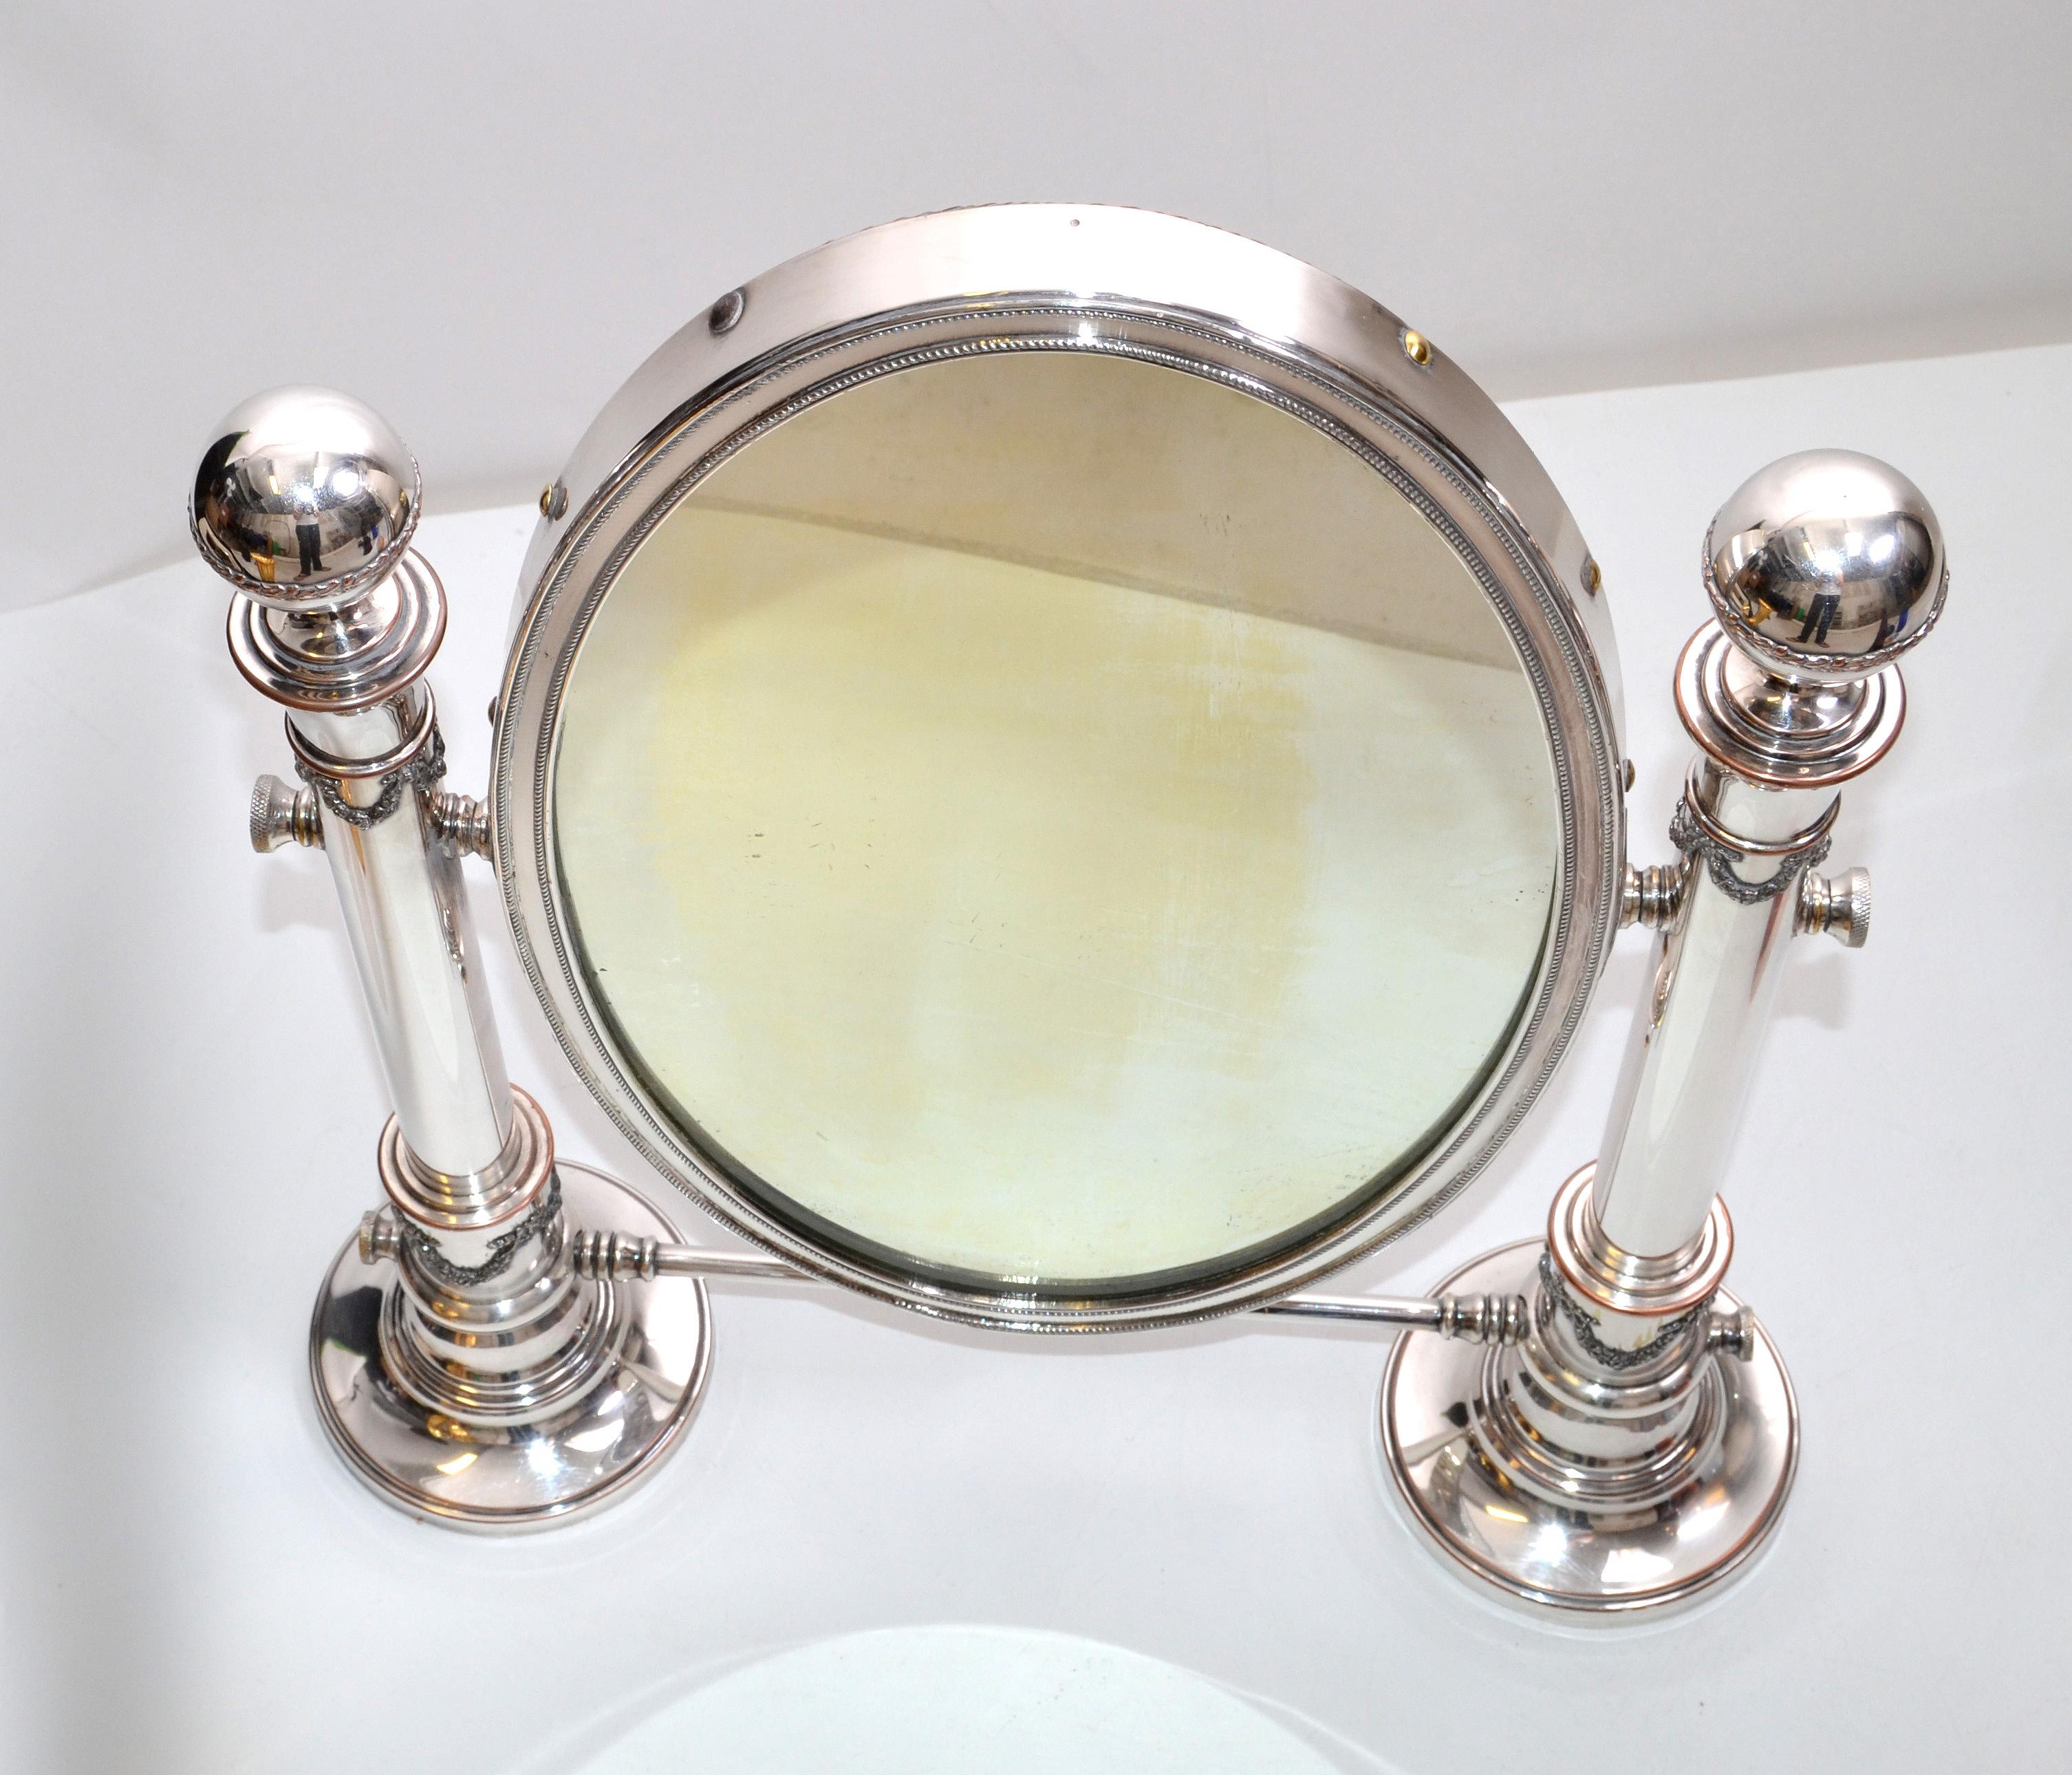 Early 20th Century British Colonial Antique 1910 Sheffield England Oval Vanity Mirror Pedestal For Sale